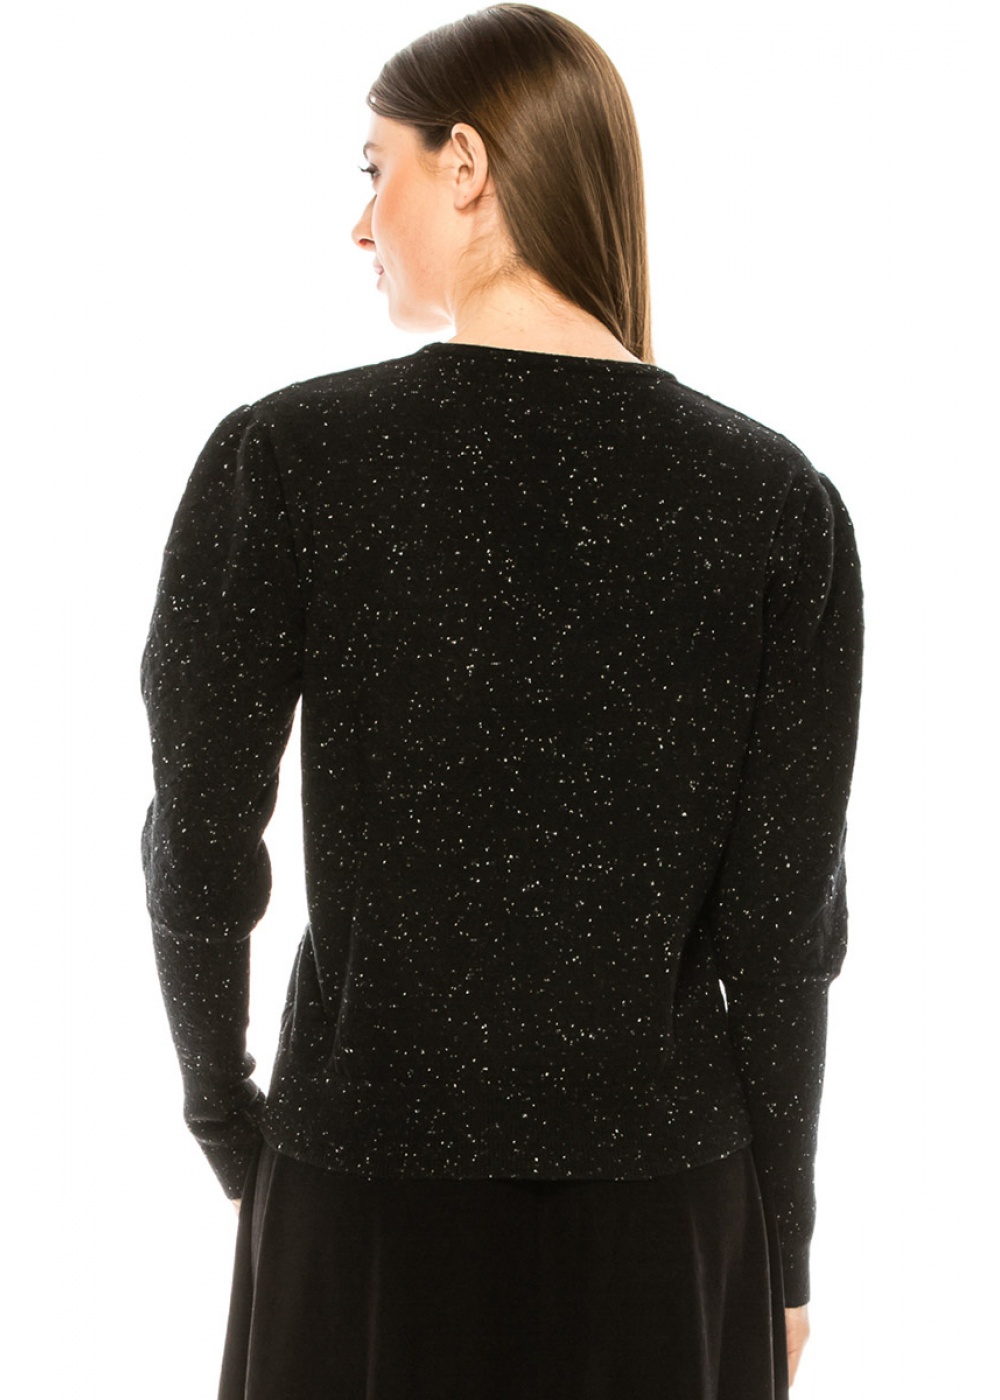 Leg-of-mutton sleeve shiny sweater in black